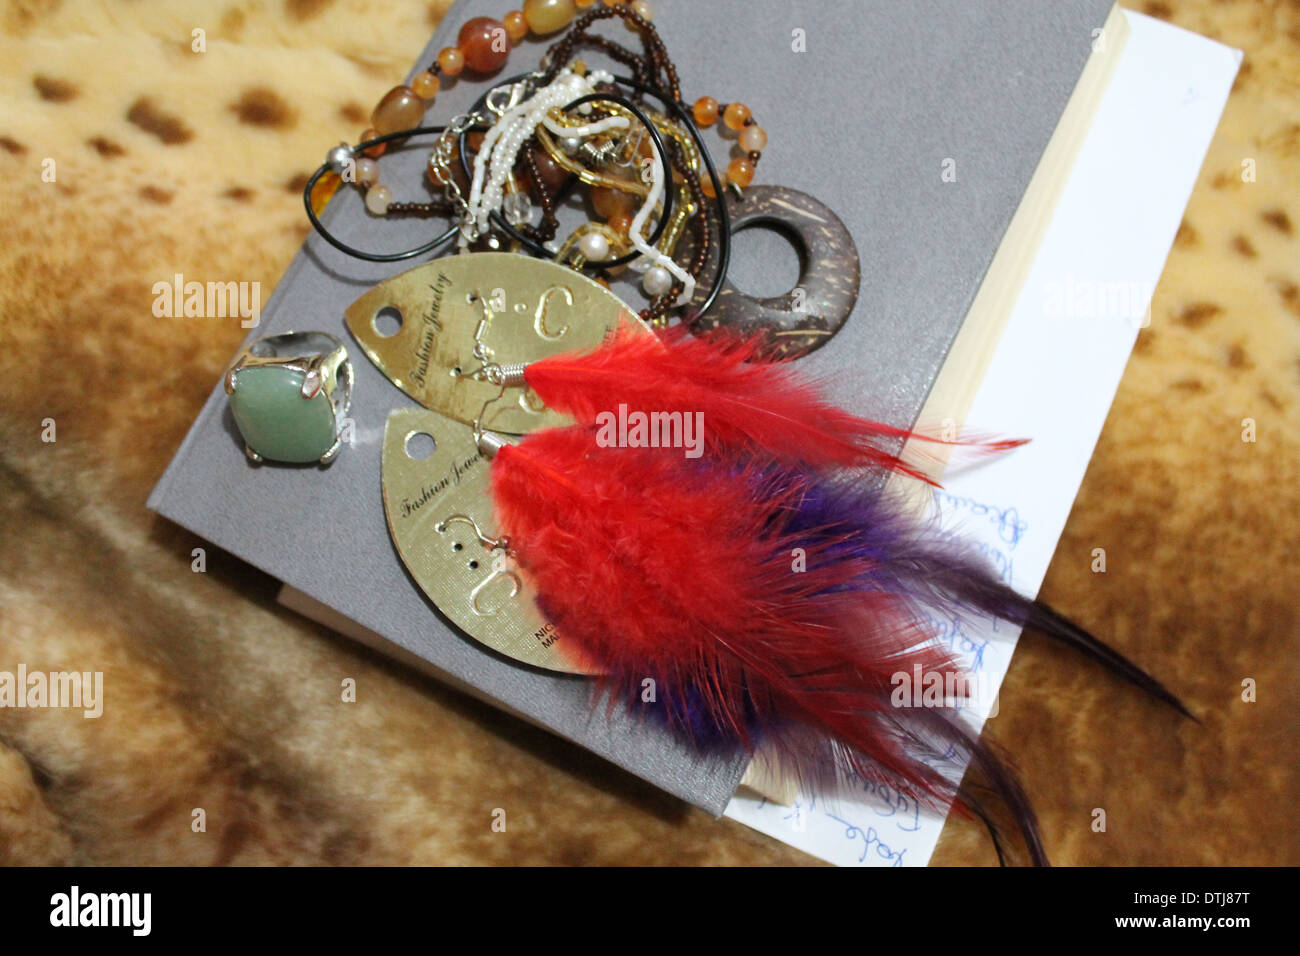 book on fur with ring, earrings from colorful feathers Stock Photo